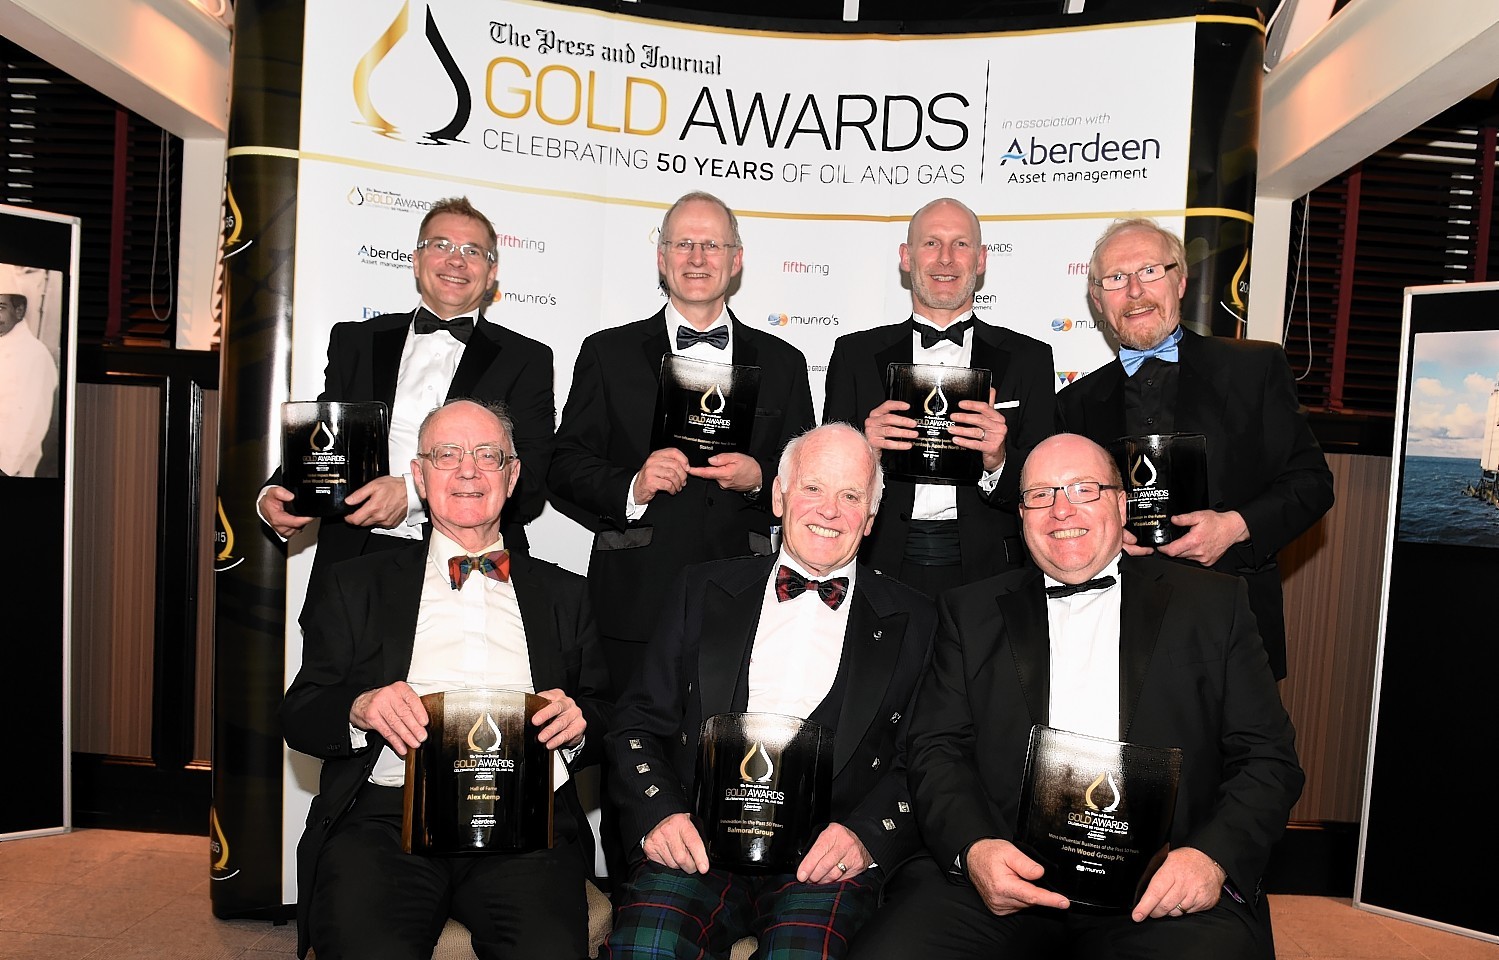 The winners at the Press and Journal Gold Awards